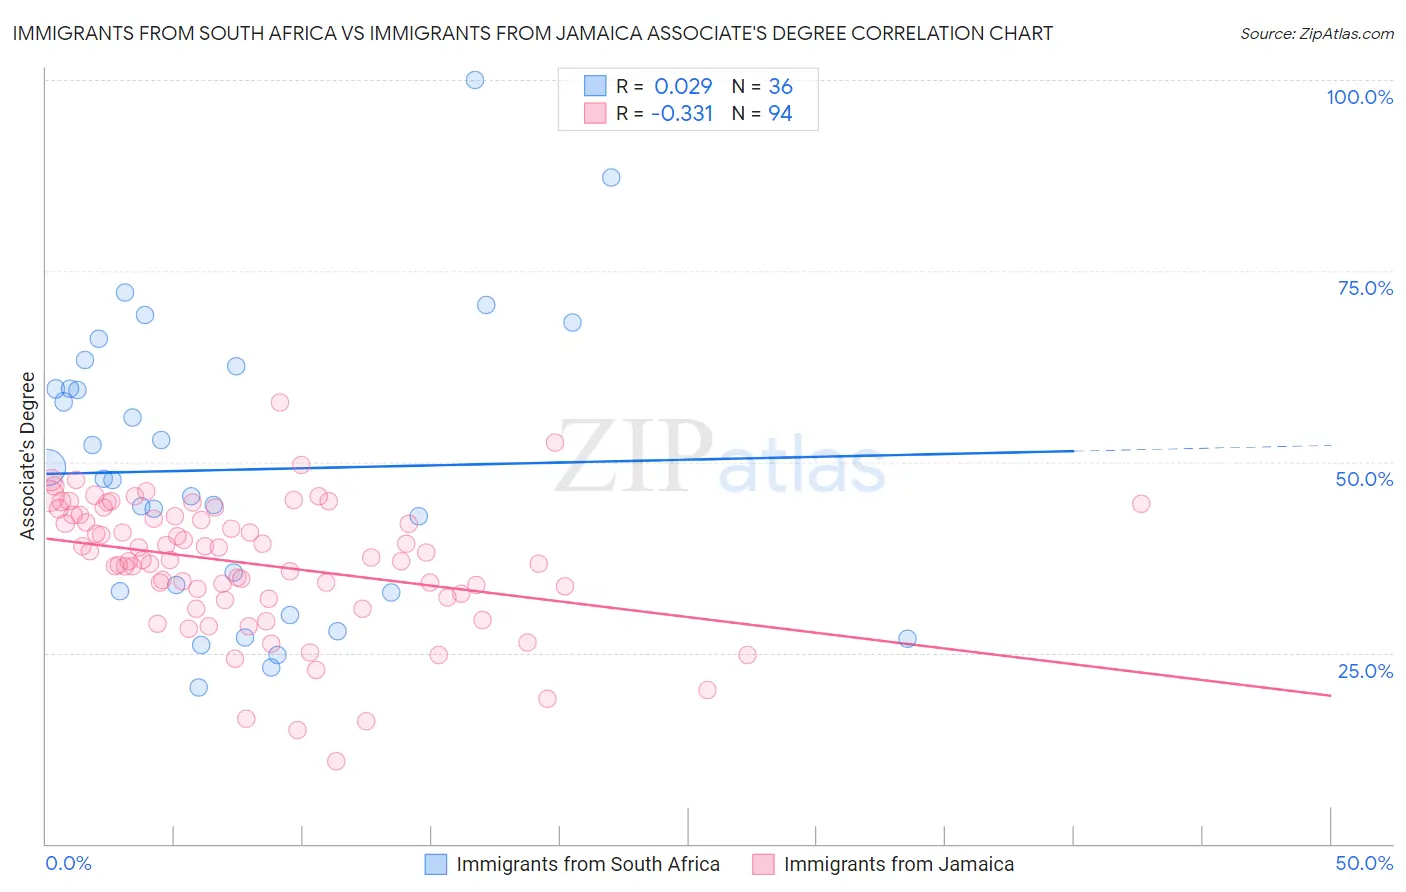 Immigrants from South Africa vs Immigrants from Jamaica Associate's Degree